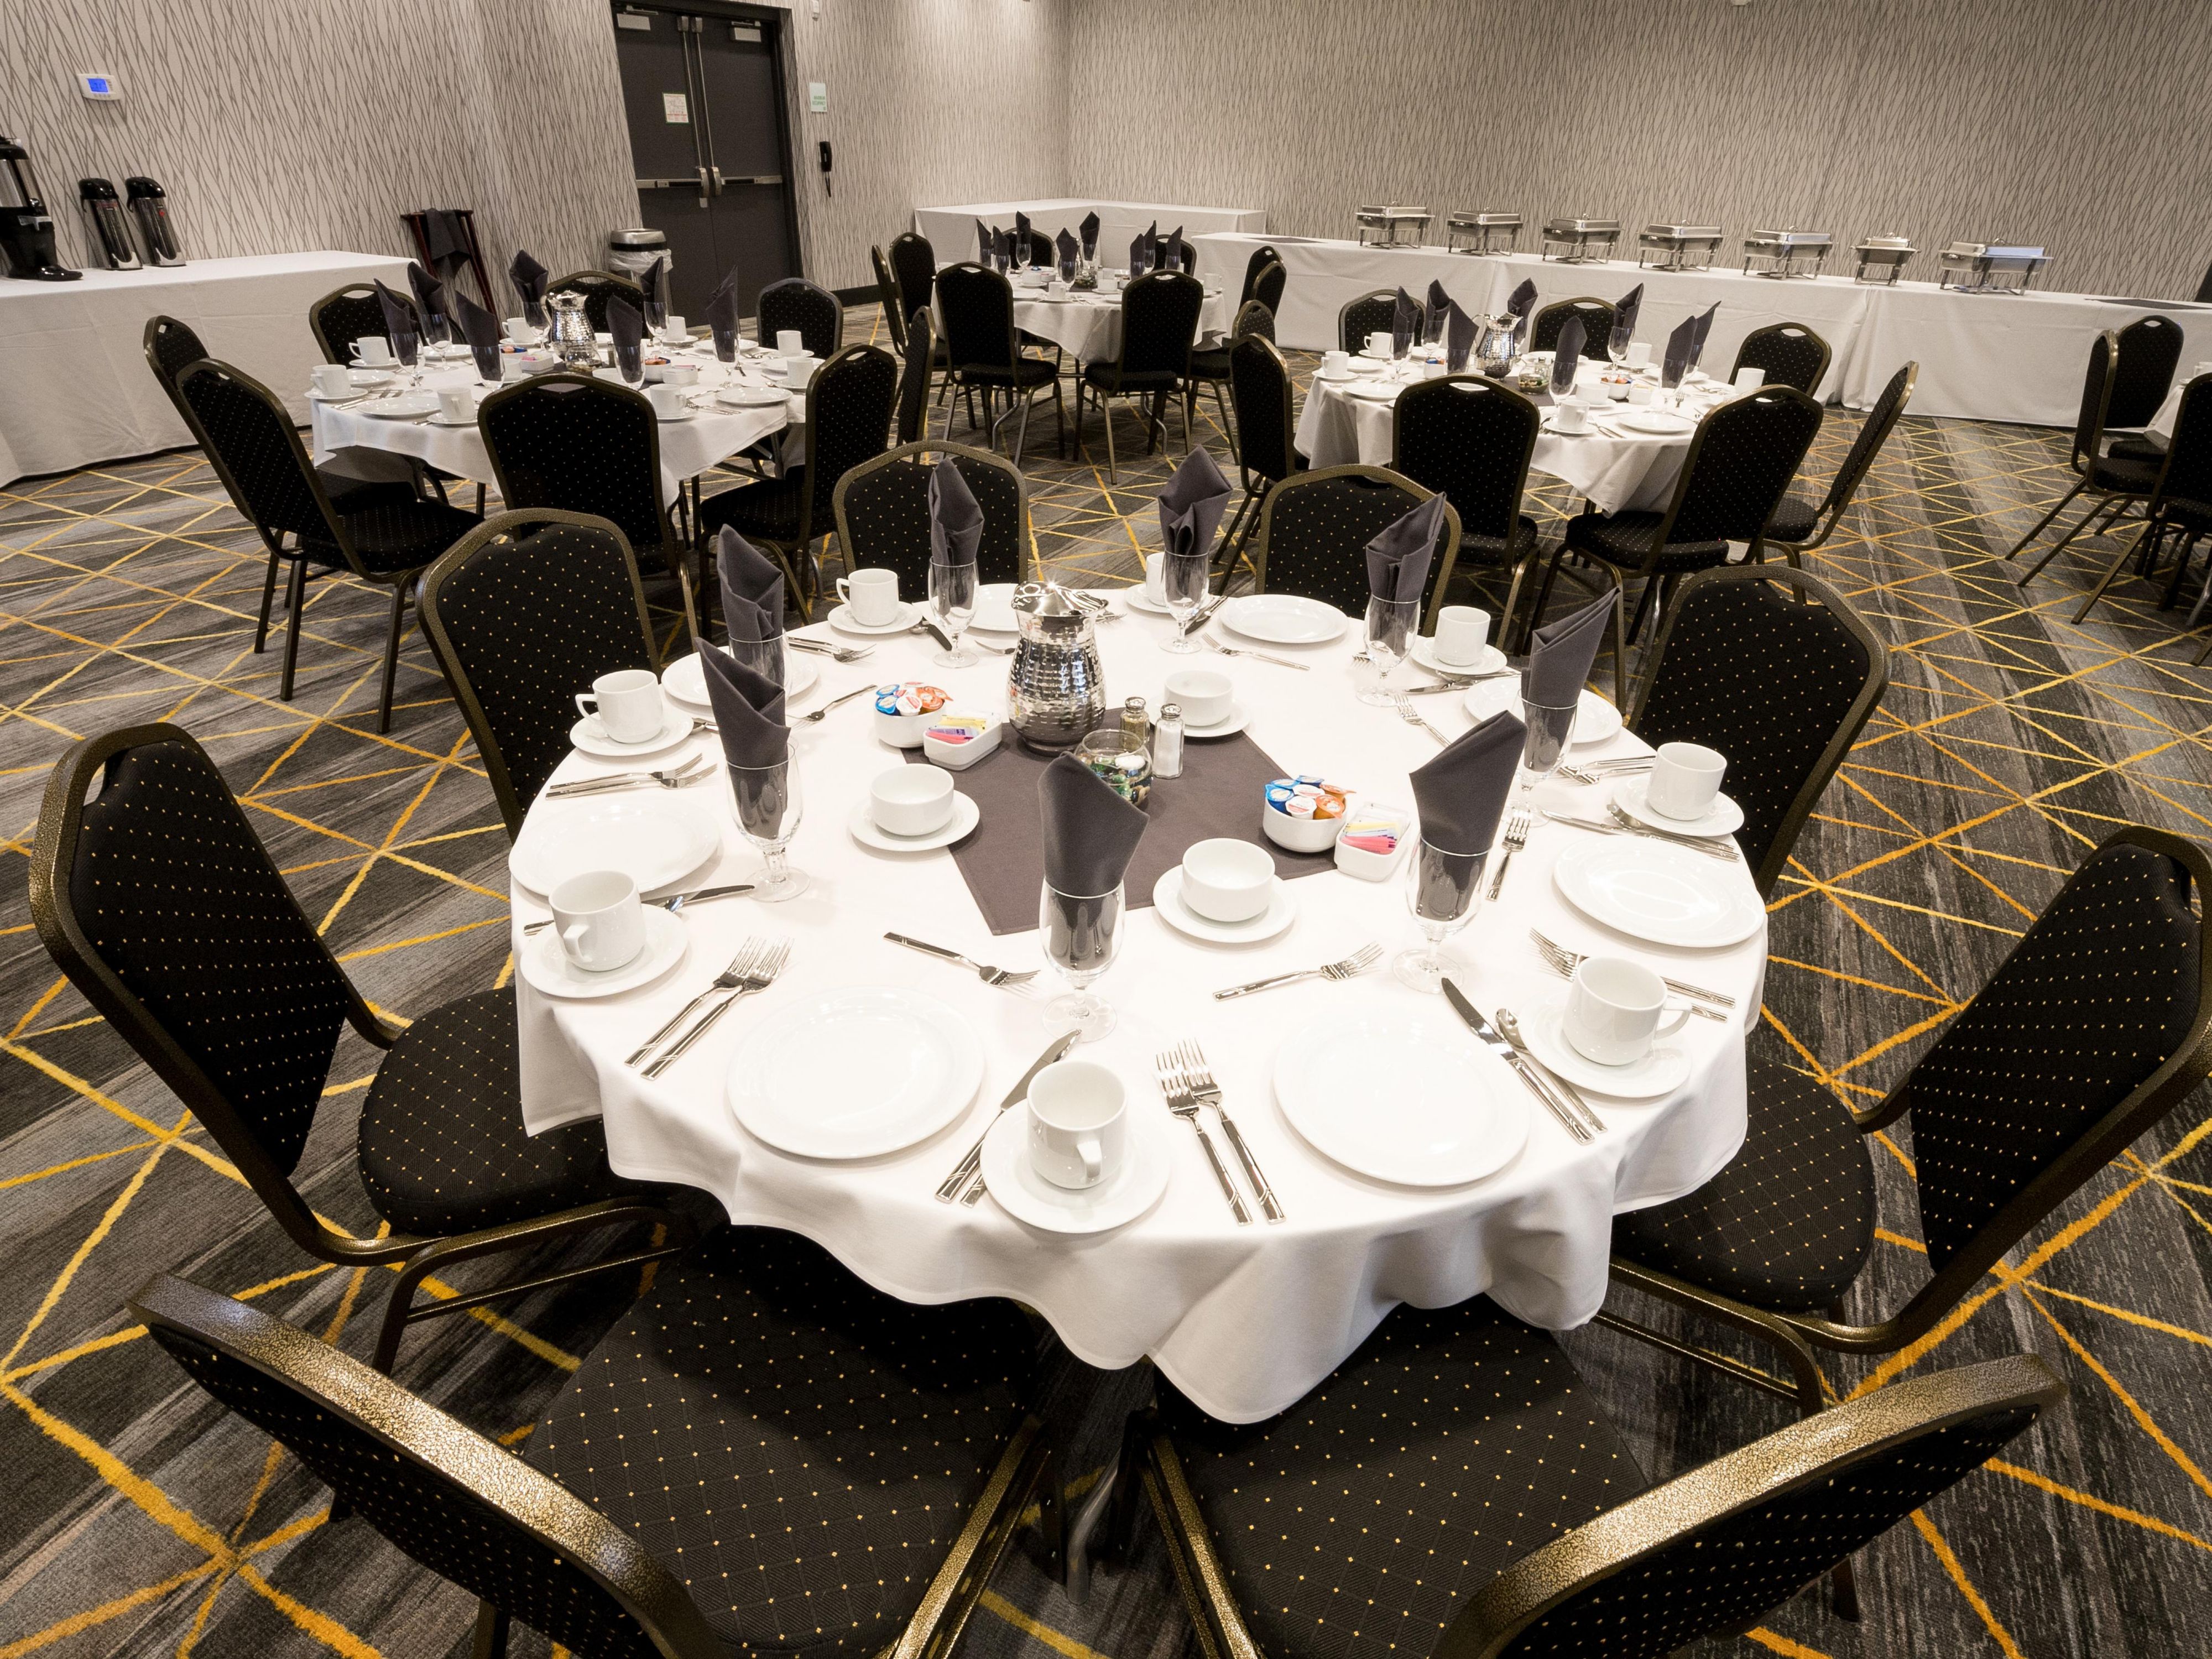 Enjoy over 5,400 square feet of meeting space with full banquet and bar services. 